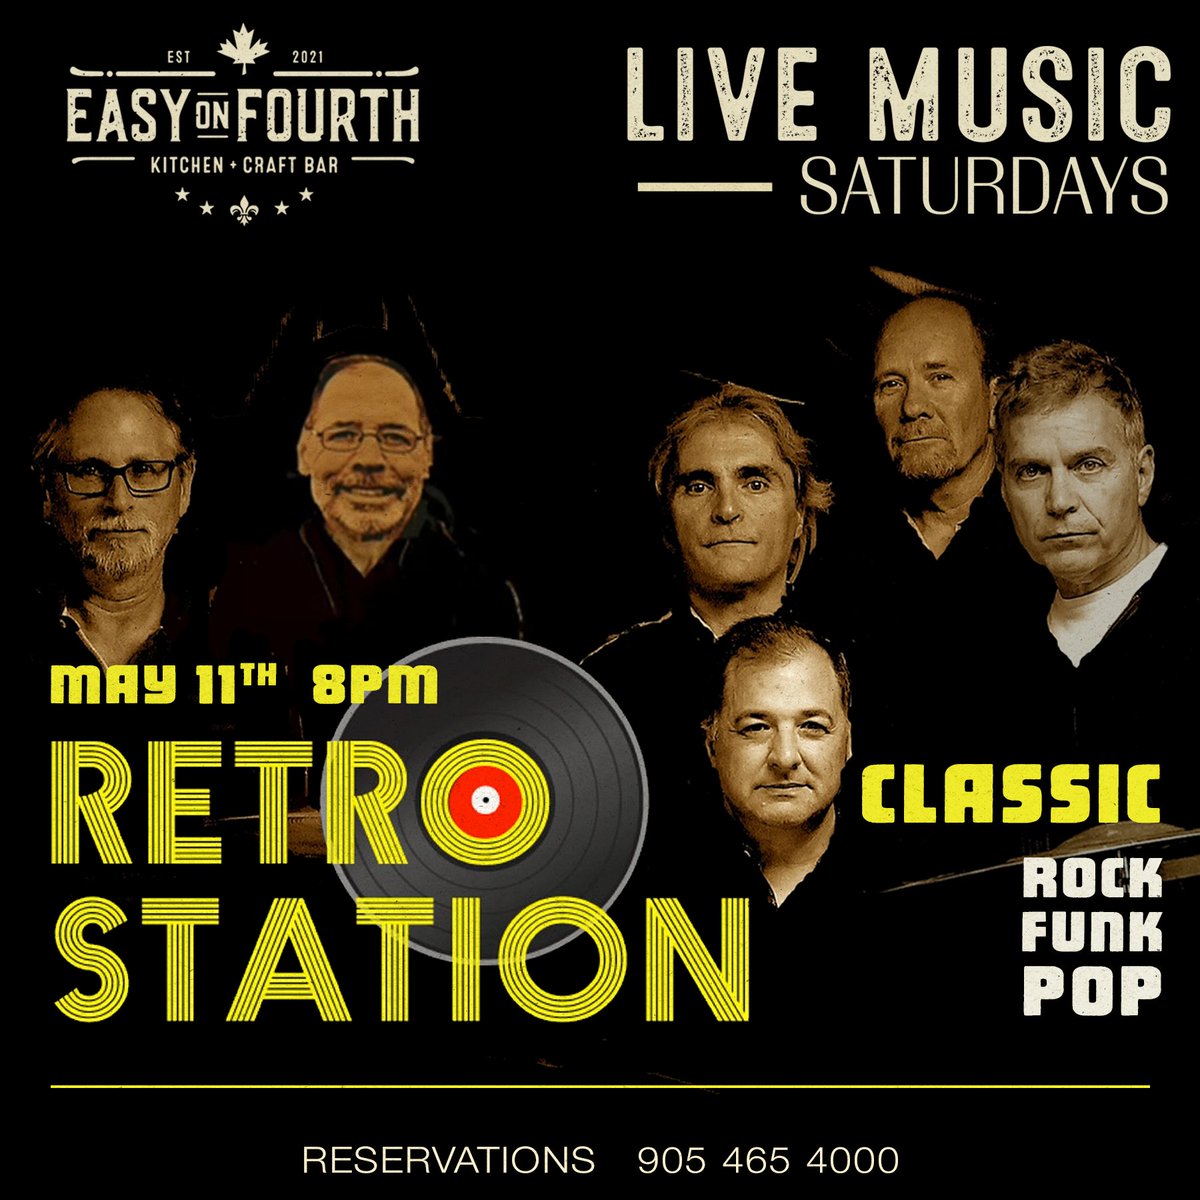 🎶🎸 With all your favourite classics, the talented Retro Station is joining us for this Live Music Saturday! Come join the party, only @easyonfourth! 🎸🎶

#LiveMusic #classicrock #pop # funk #guitarist #social #LiveMusicThursday #oakville #craftbeer #restaurant @easy_on_fourth